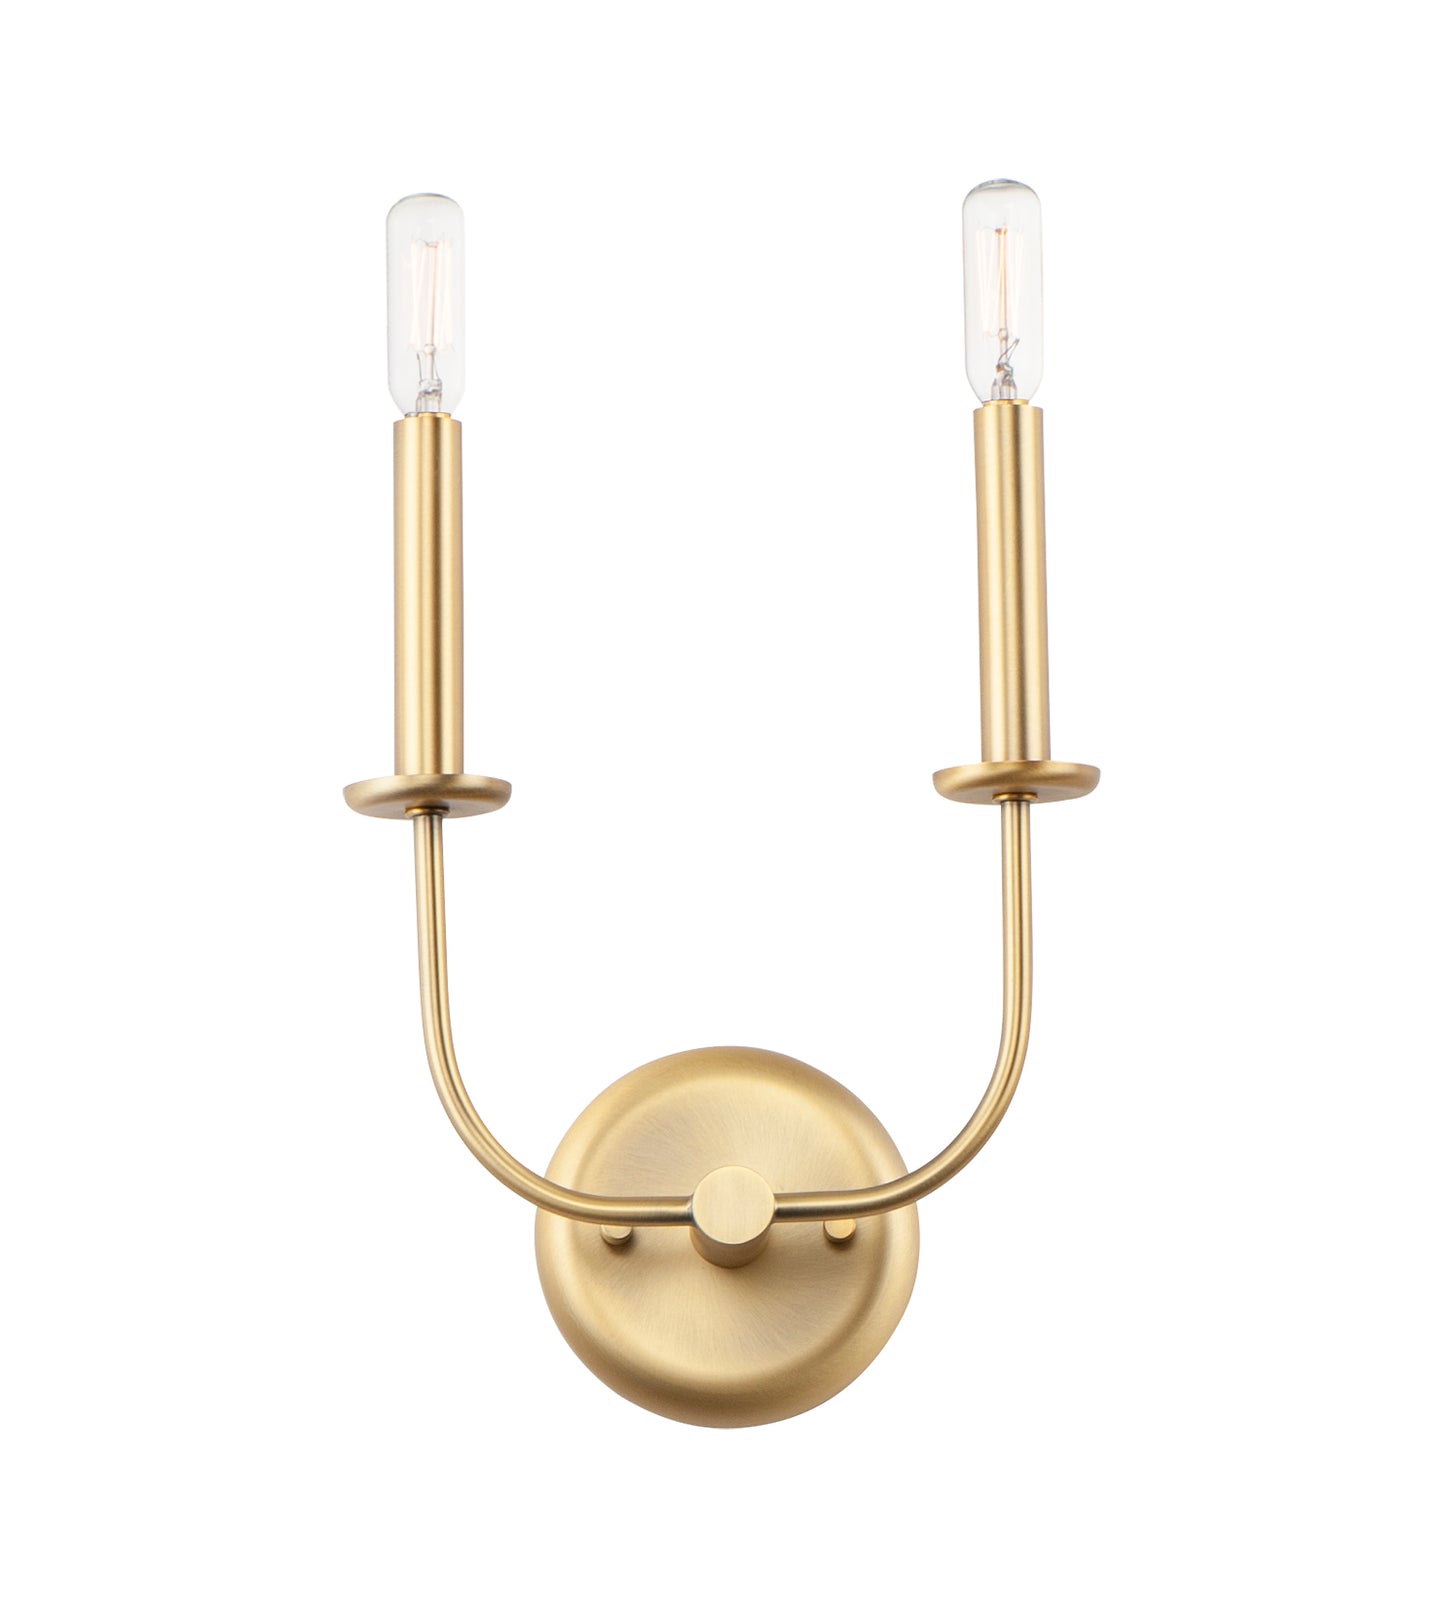 Maxim Wesley 2-Light Wall Sconce